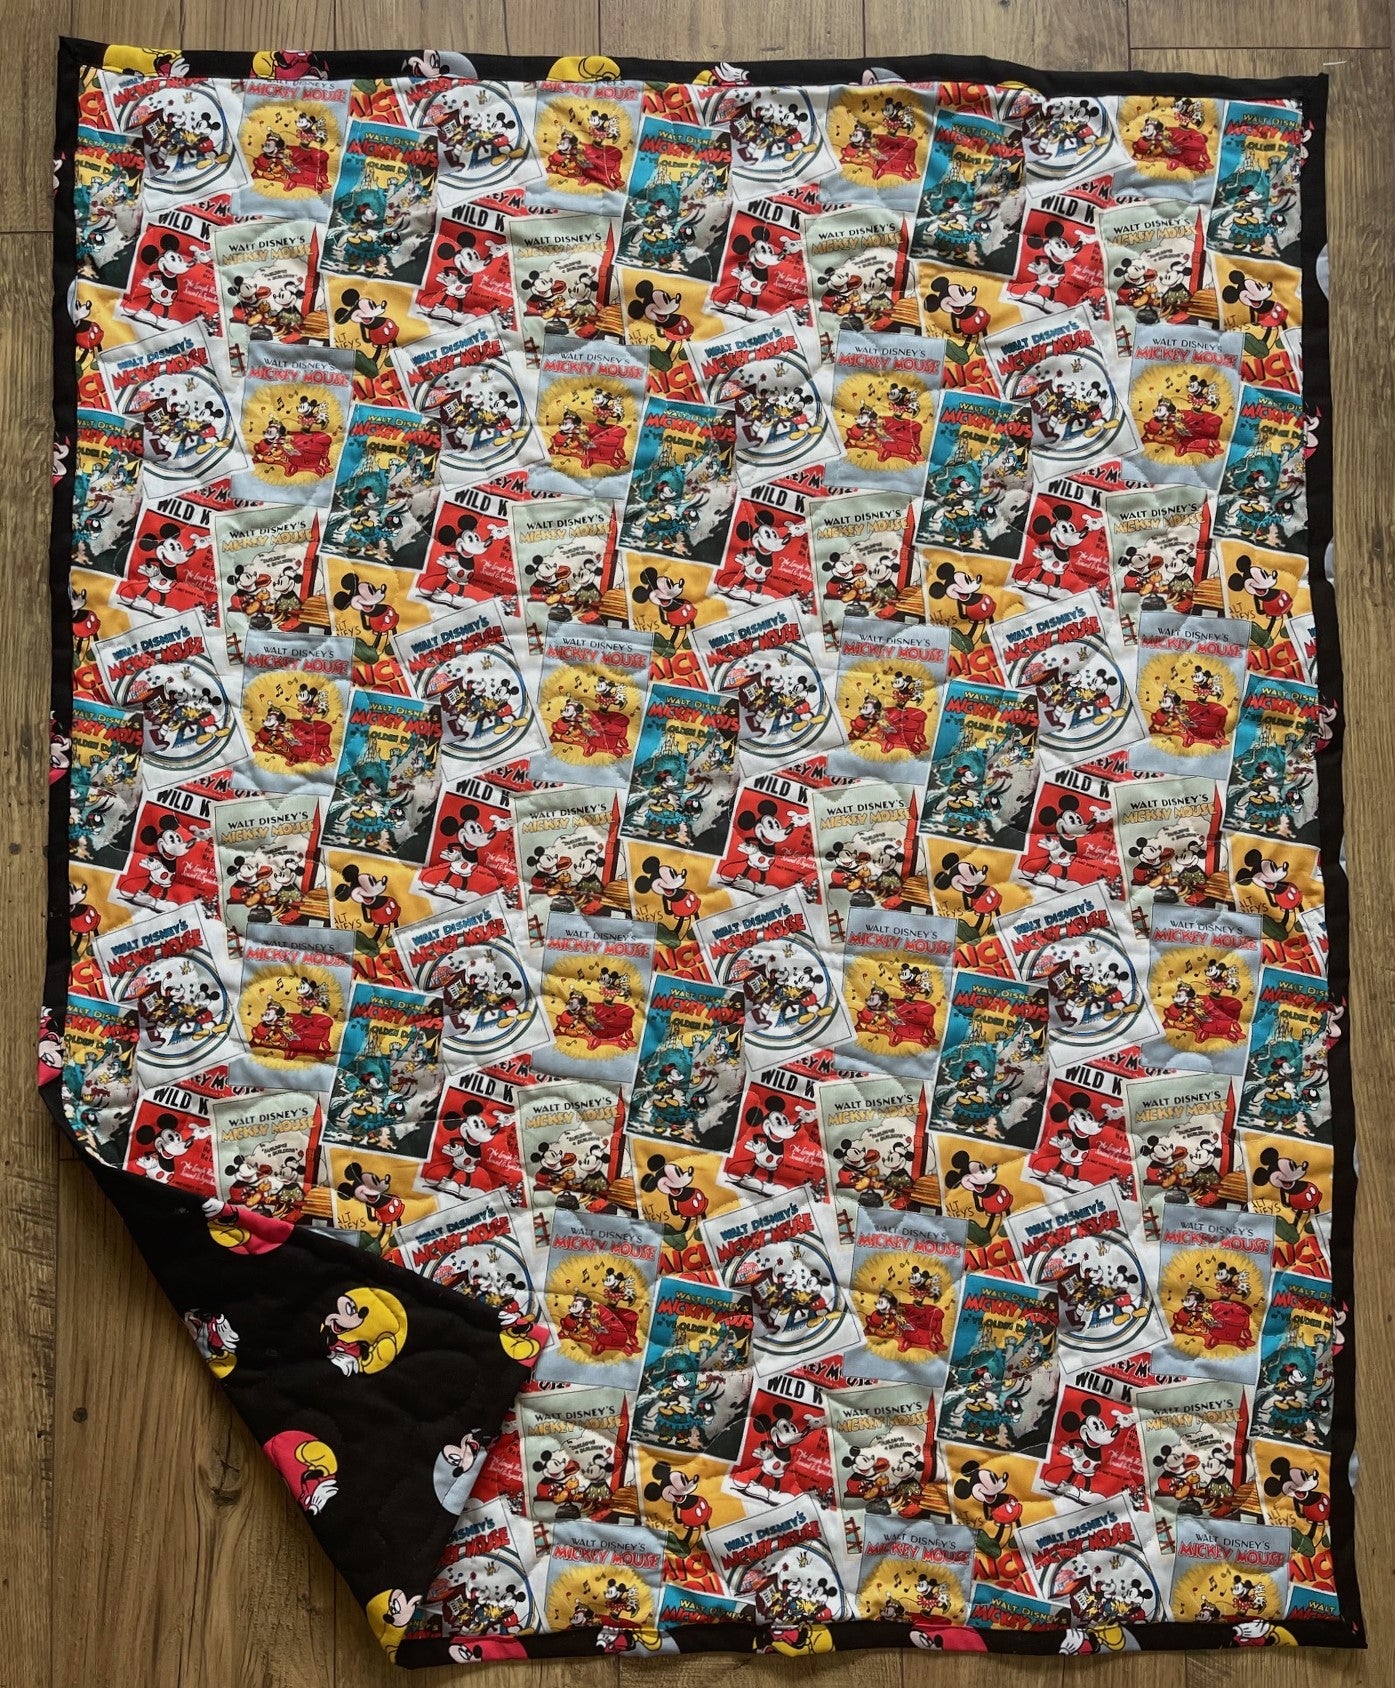 CLASSIC WALT DISNEY'S MICKEY MOUSE & MINNIE MOUSE POSTERS Inspired Quilted Blanket 36"x44"